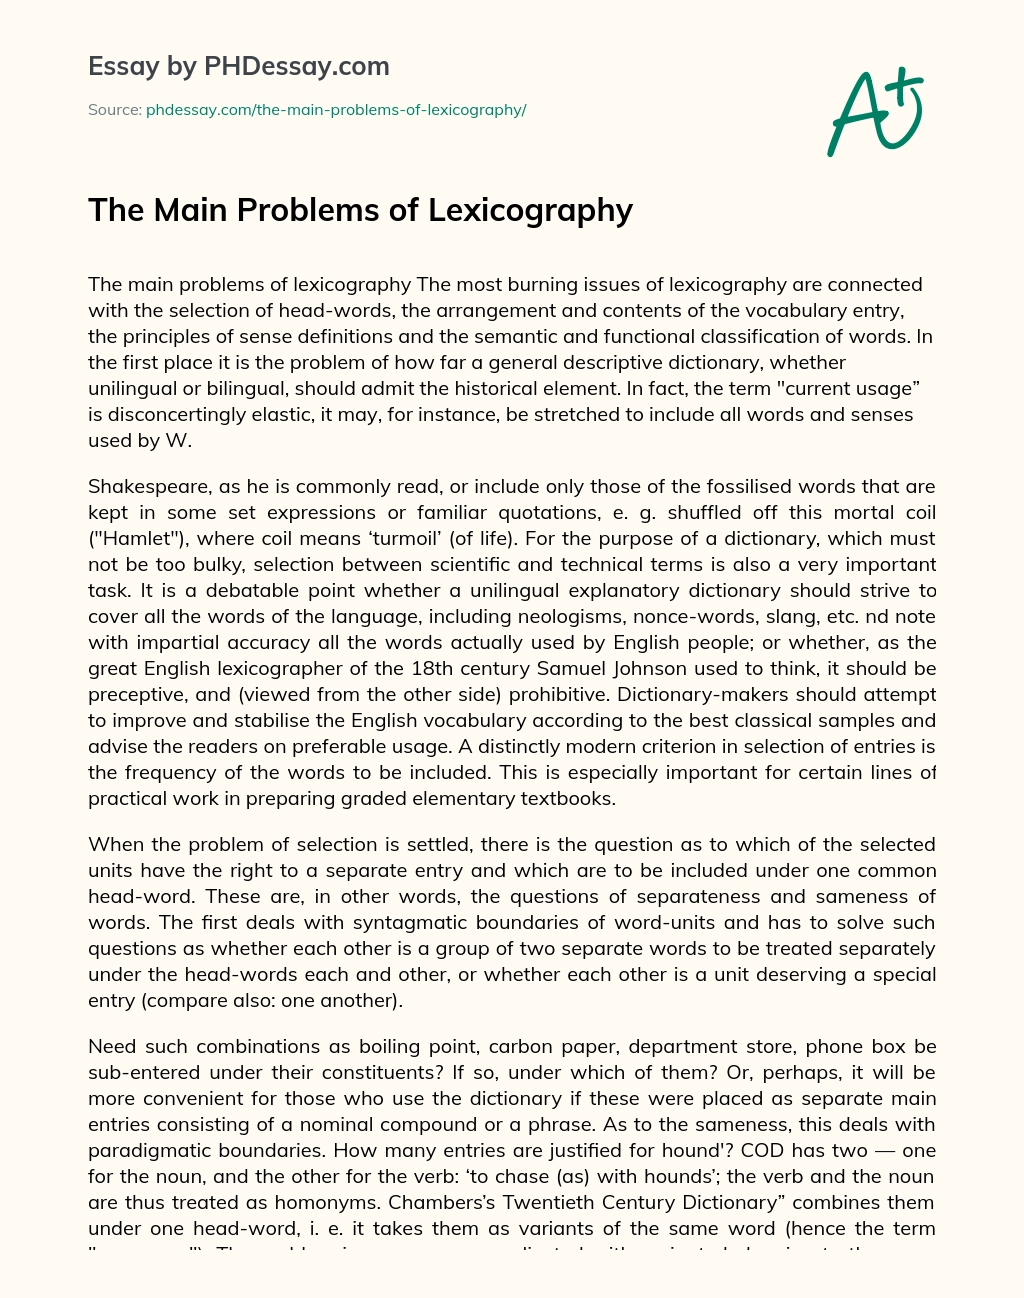 The Main Problems of Lexicography essay